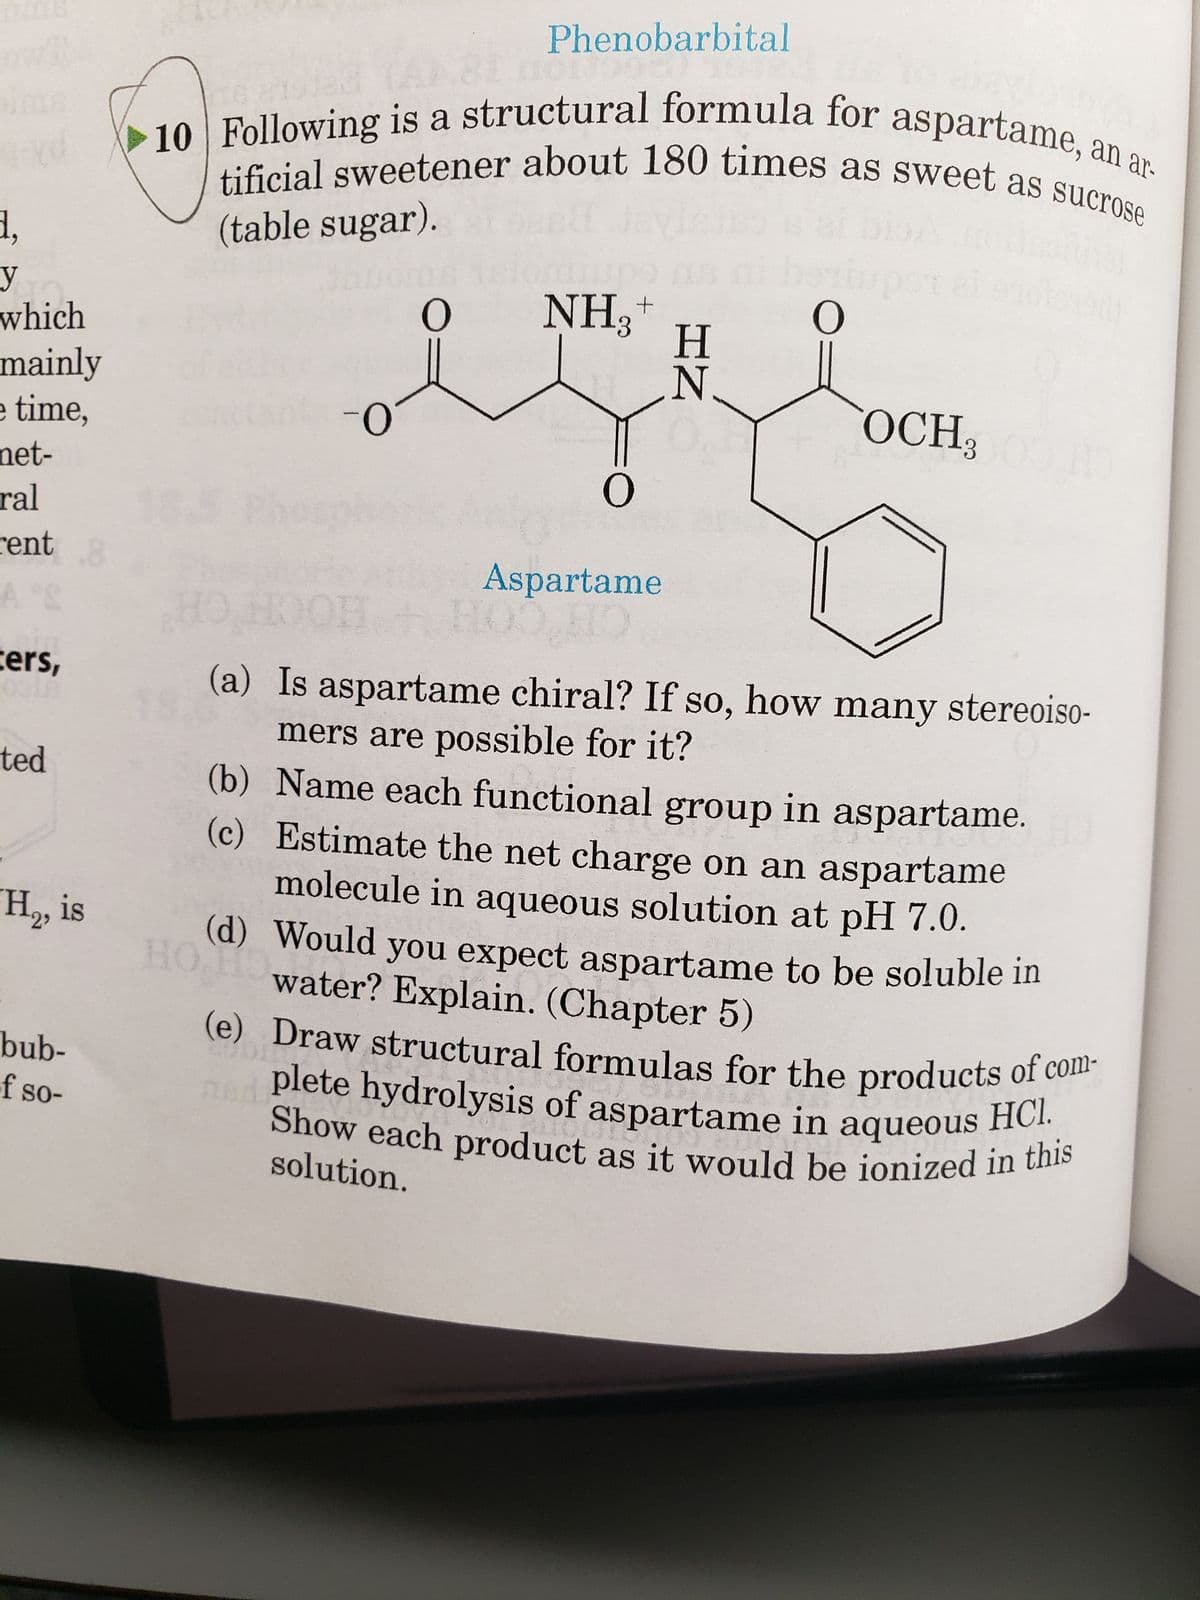 d.
y
which
mainly
e time,
net-
ral
rent .8
ters,
ted
H₂, is
bub-
of so-
nolad
(table sugar).
10 Following is a structural formula for aspartame, an ar-
tificial sweetener about 180 times as sweet as sucrose
HO
-O
(d)
O
Phenobarbital
NH₂+
O
Aspartame
Η
HN
요
di
HO, HOOH + HO
(a) Is aspartame chiral? If so, how many stereoiso-
mers are possible for it?
(c)
(b) Name each functional group in aspartame. H
Estimate the net charge on an aspartame
molecule in aqueous solution at pH 7.0.
Would you expect aspartame to be soluble in
water? Explain. (Chapter 5)
CUDIET
(e) Draw structural formulas for the products of com-
plete hydrolysis of aspartame in aqueous HCI.
Show each product as it would be ionized in this
1
Ques
gune
solution.
OCH;100.HO